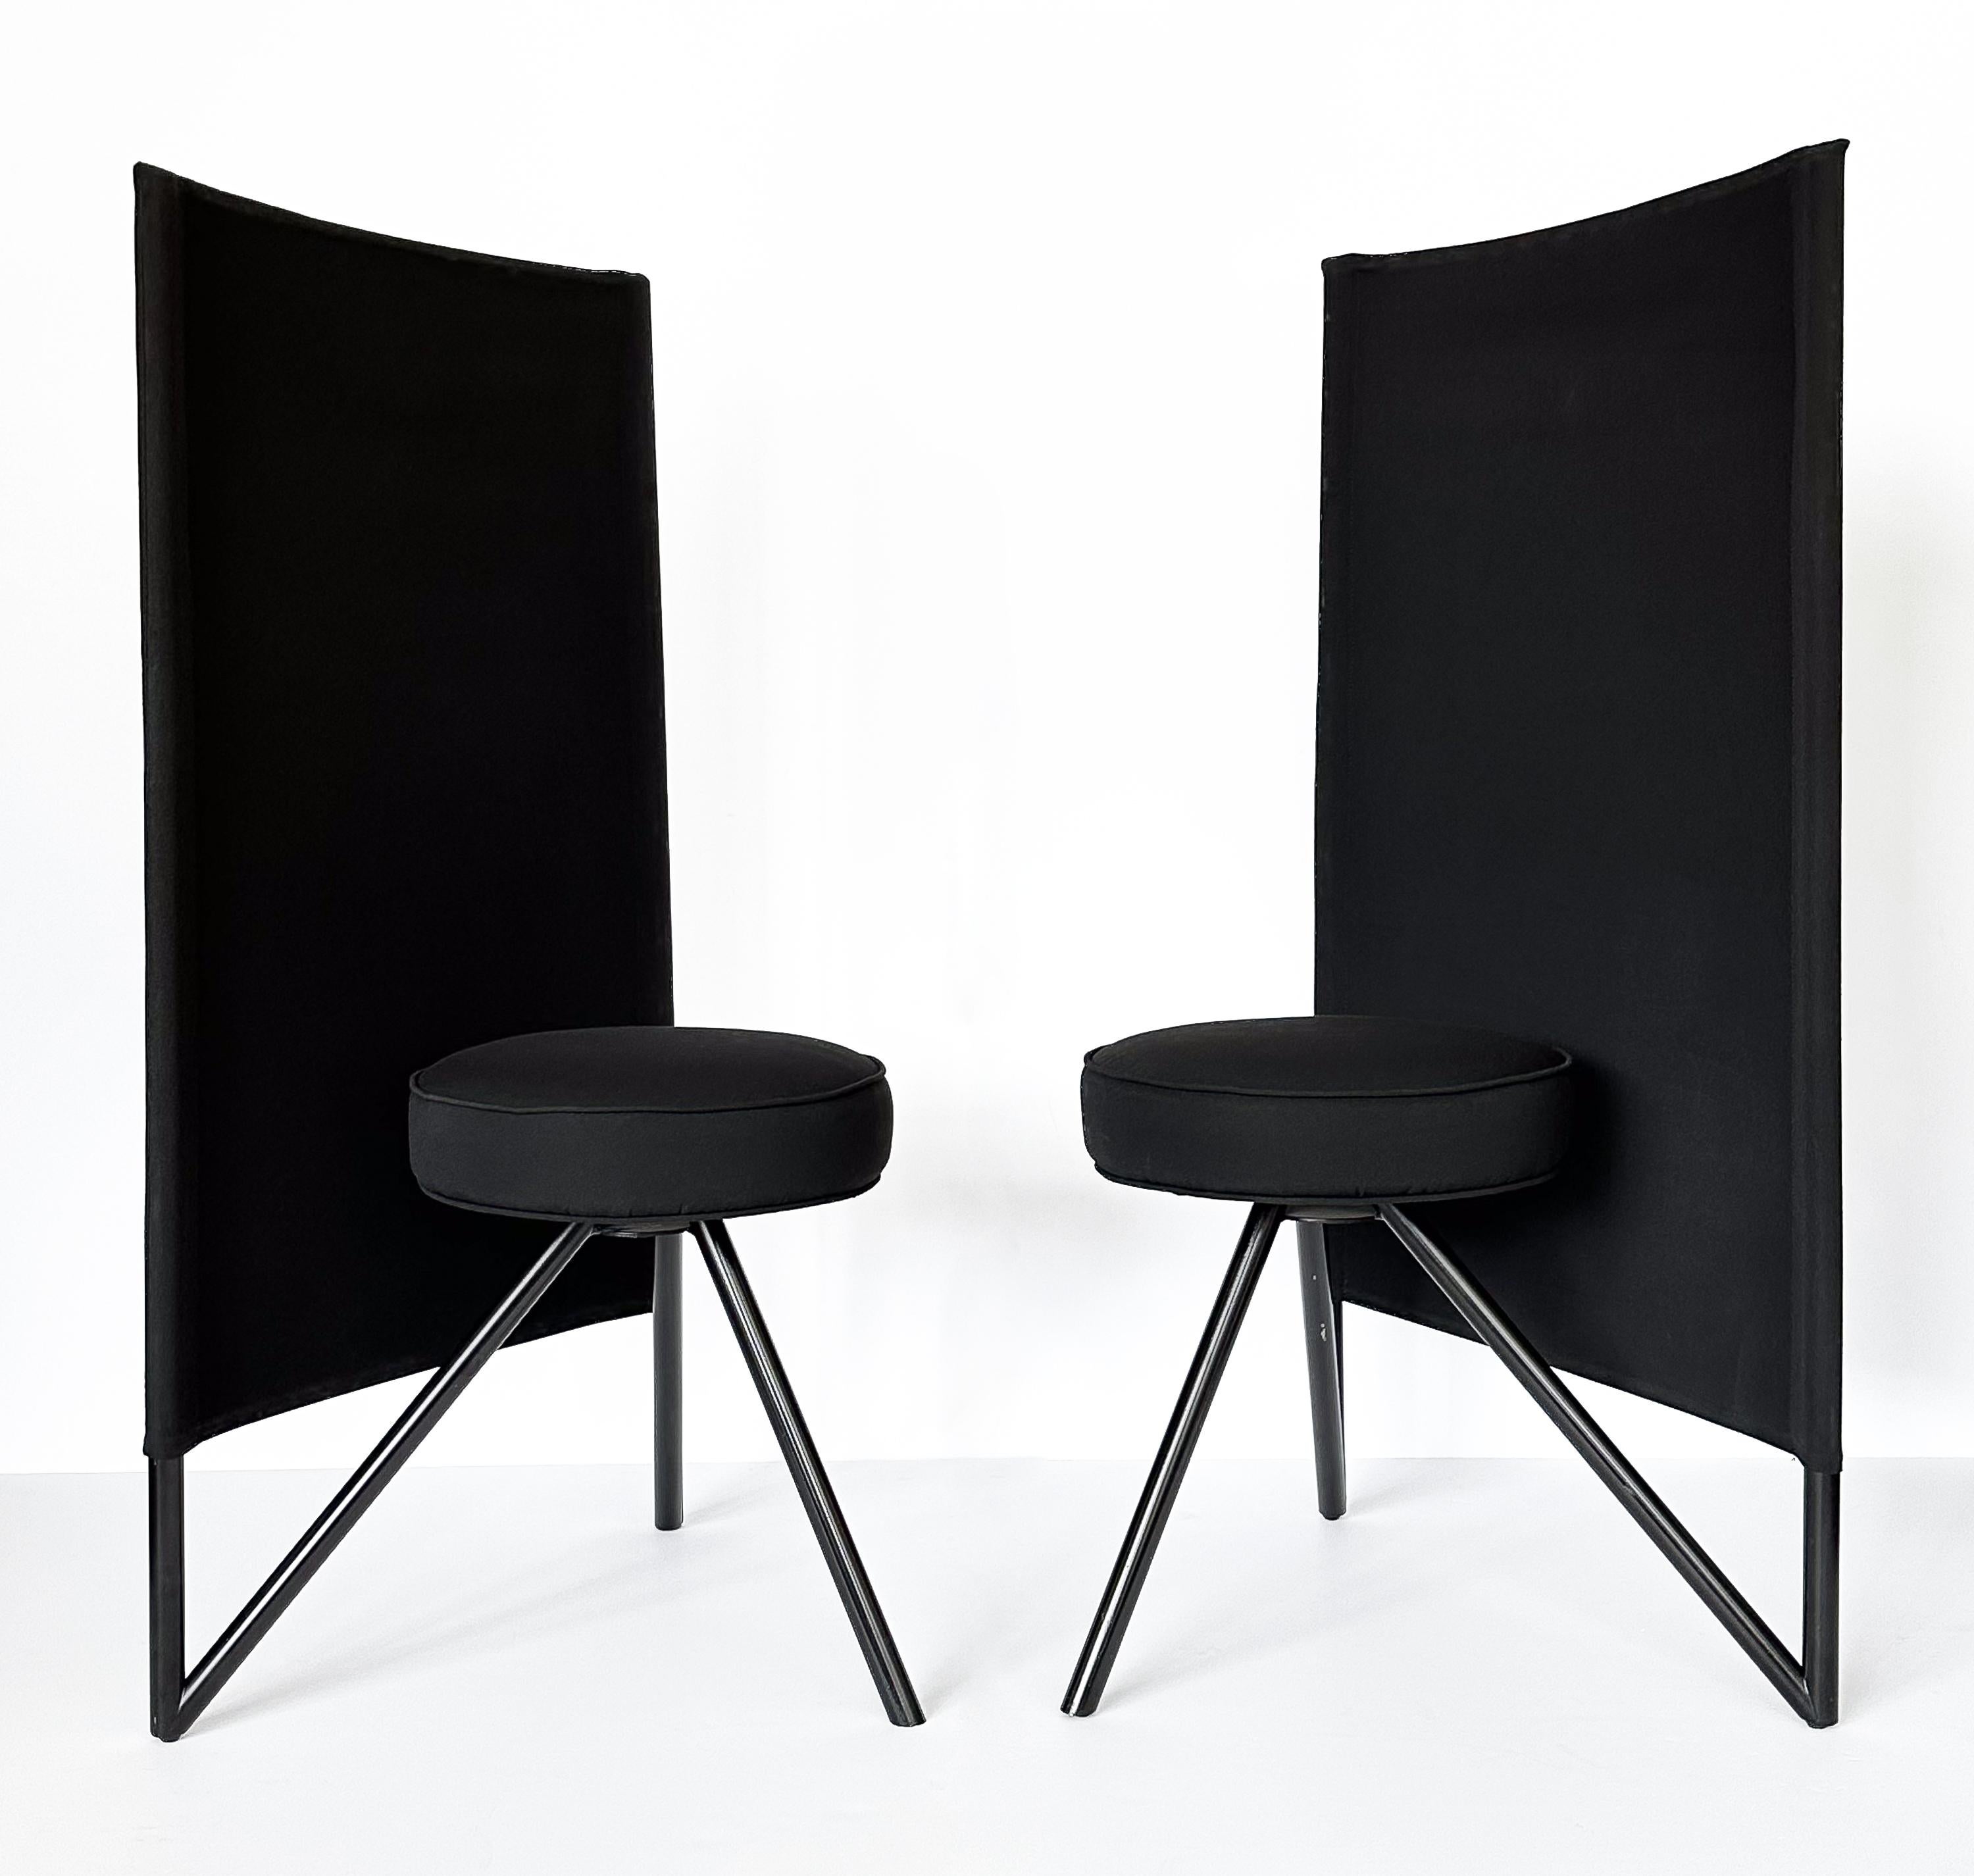 Introducing the rare and collectible “Miss Wirt” chairs, a post-modern marvel designed by the iconic Philippe Starck for Disform, Spain circa 1982-1983. This pair epitomizes the sheer brilliance and forward-thinking of Starck, combining literature,